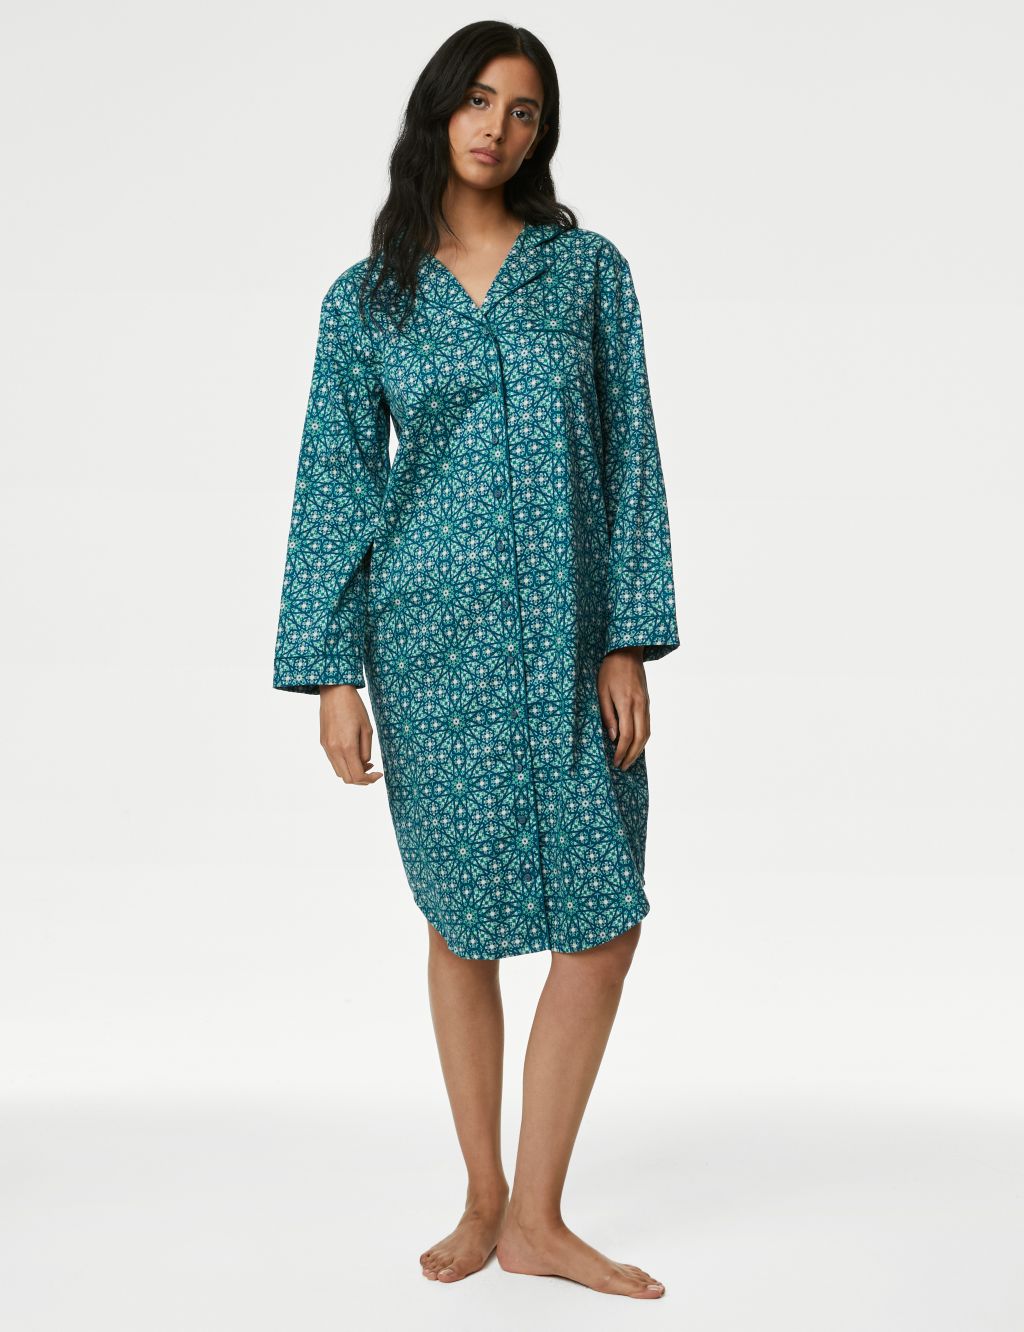 Buy Women’s Nightshirts from the M&S UK Online Shop